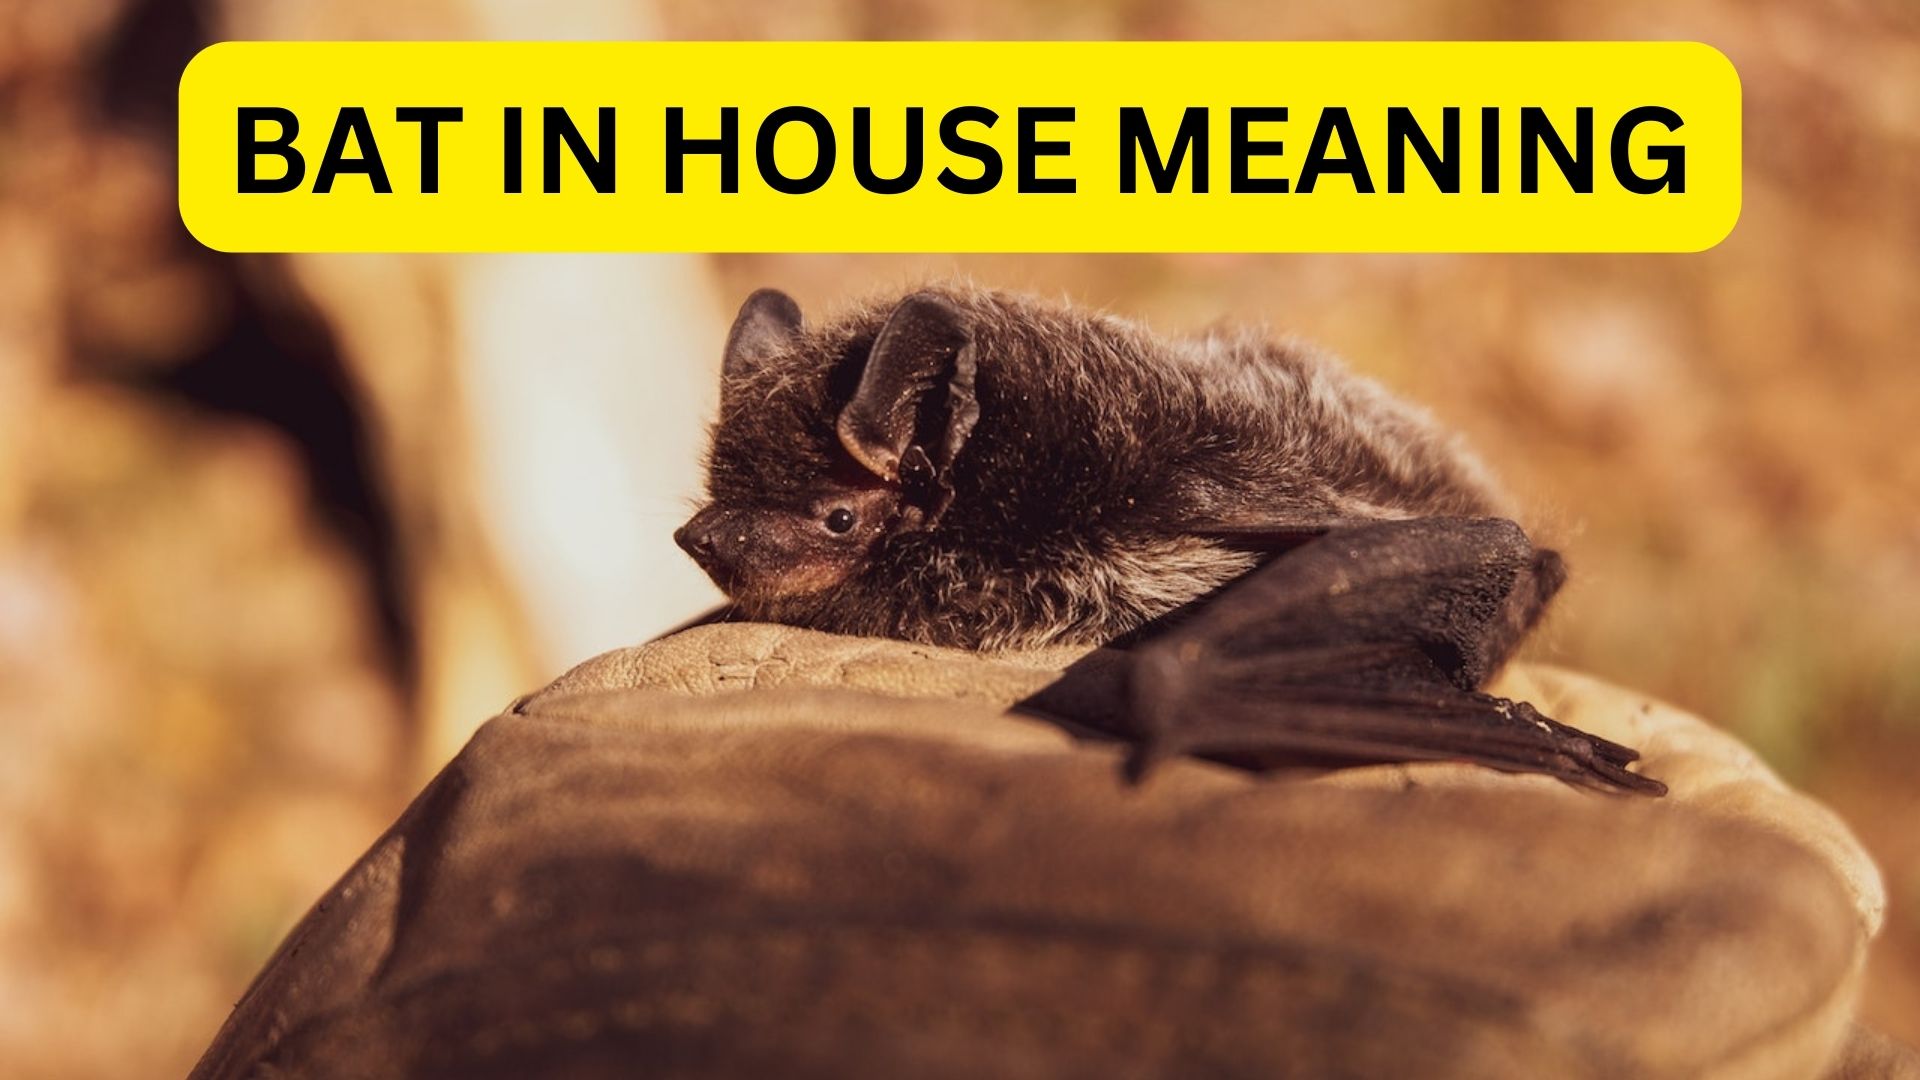 Bat In House Meaning - A Devil Is Coming To You